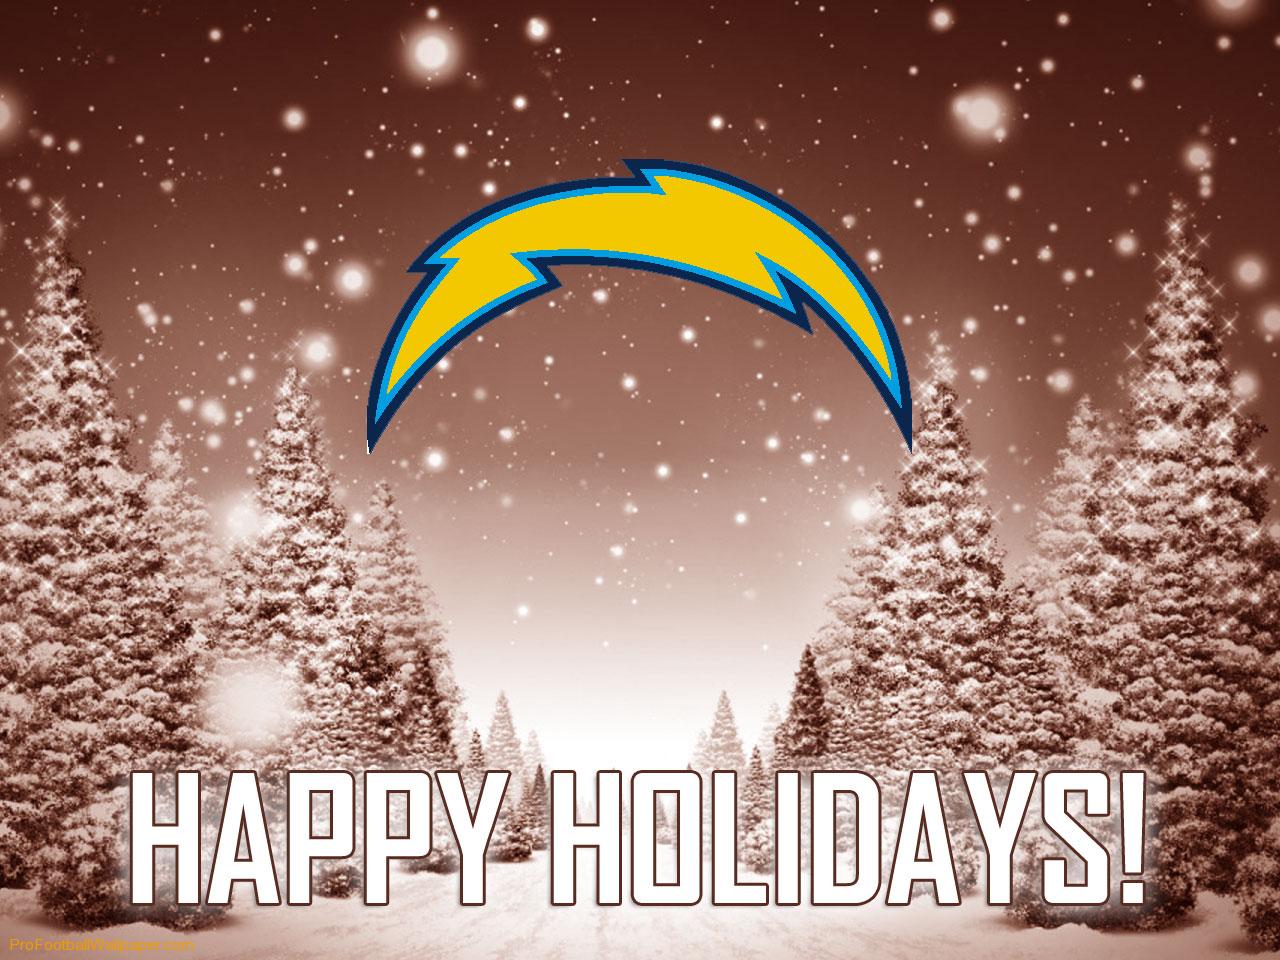 San Diego Chargers Holidays Wallpaper HD Res